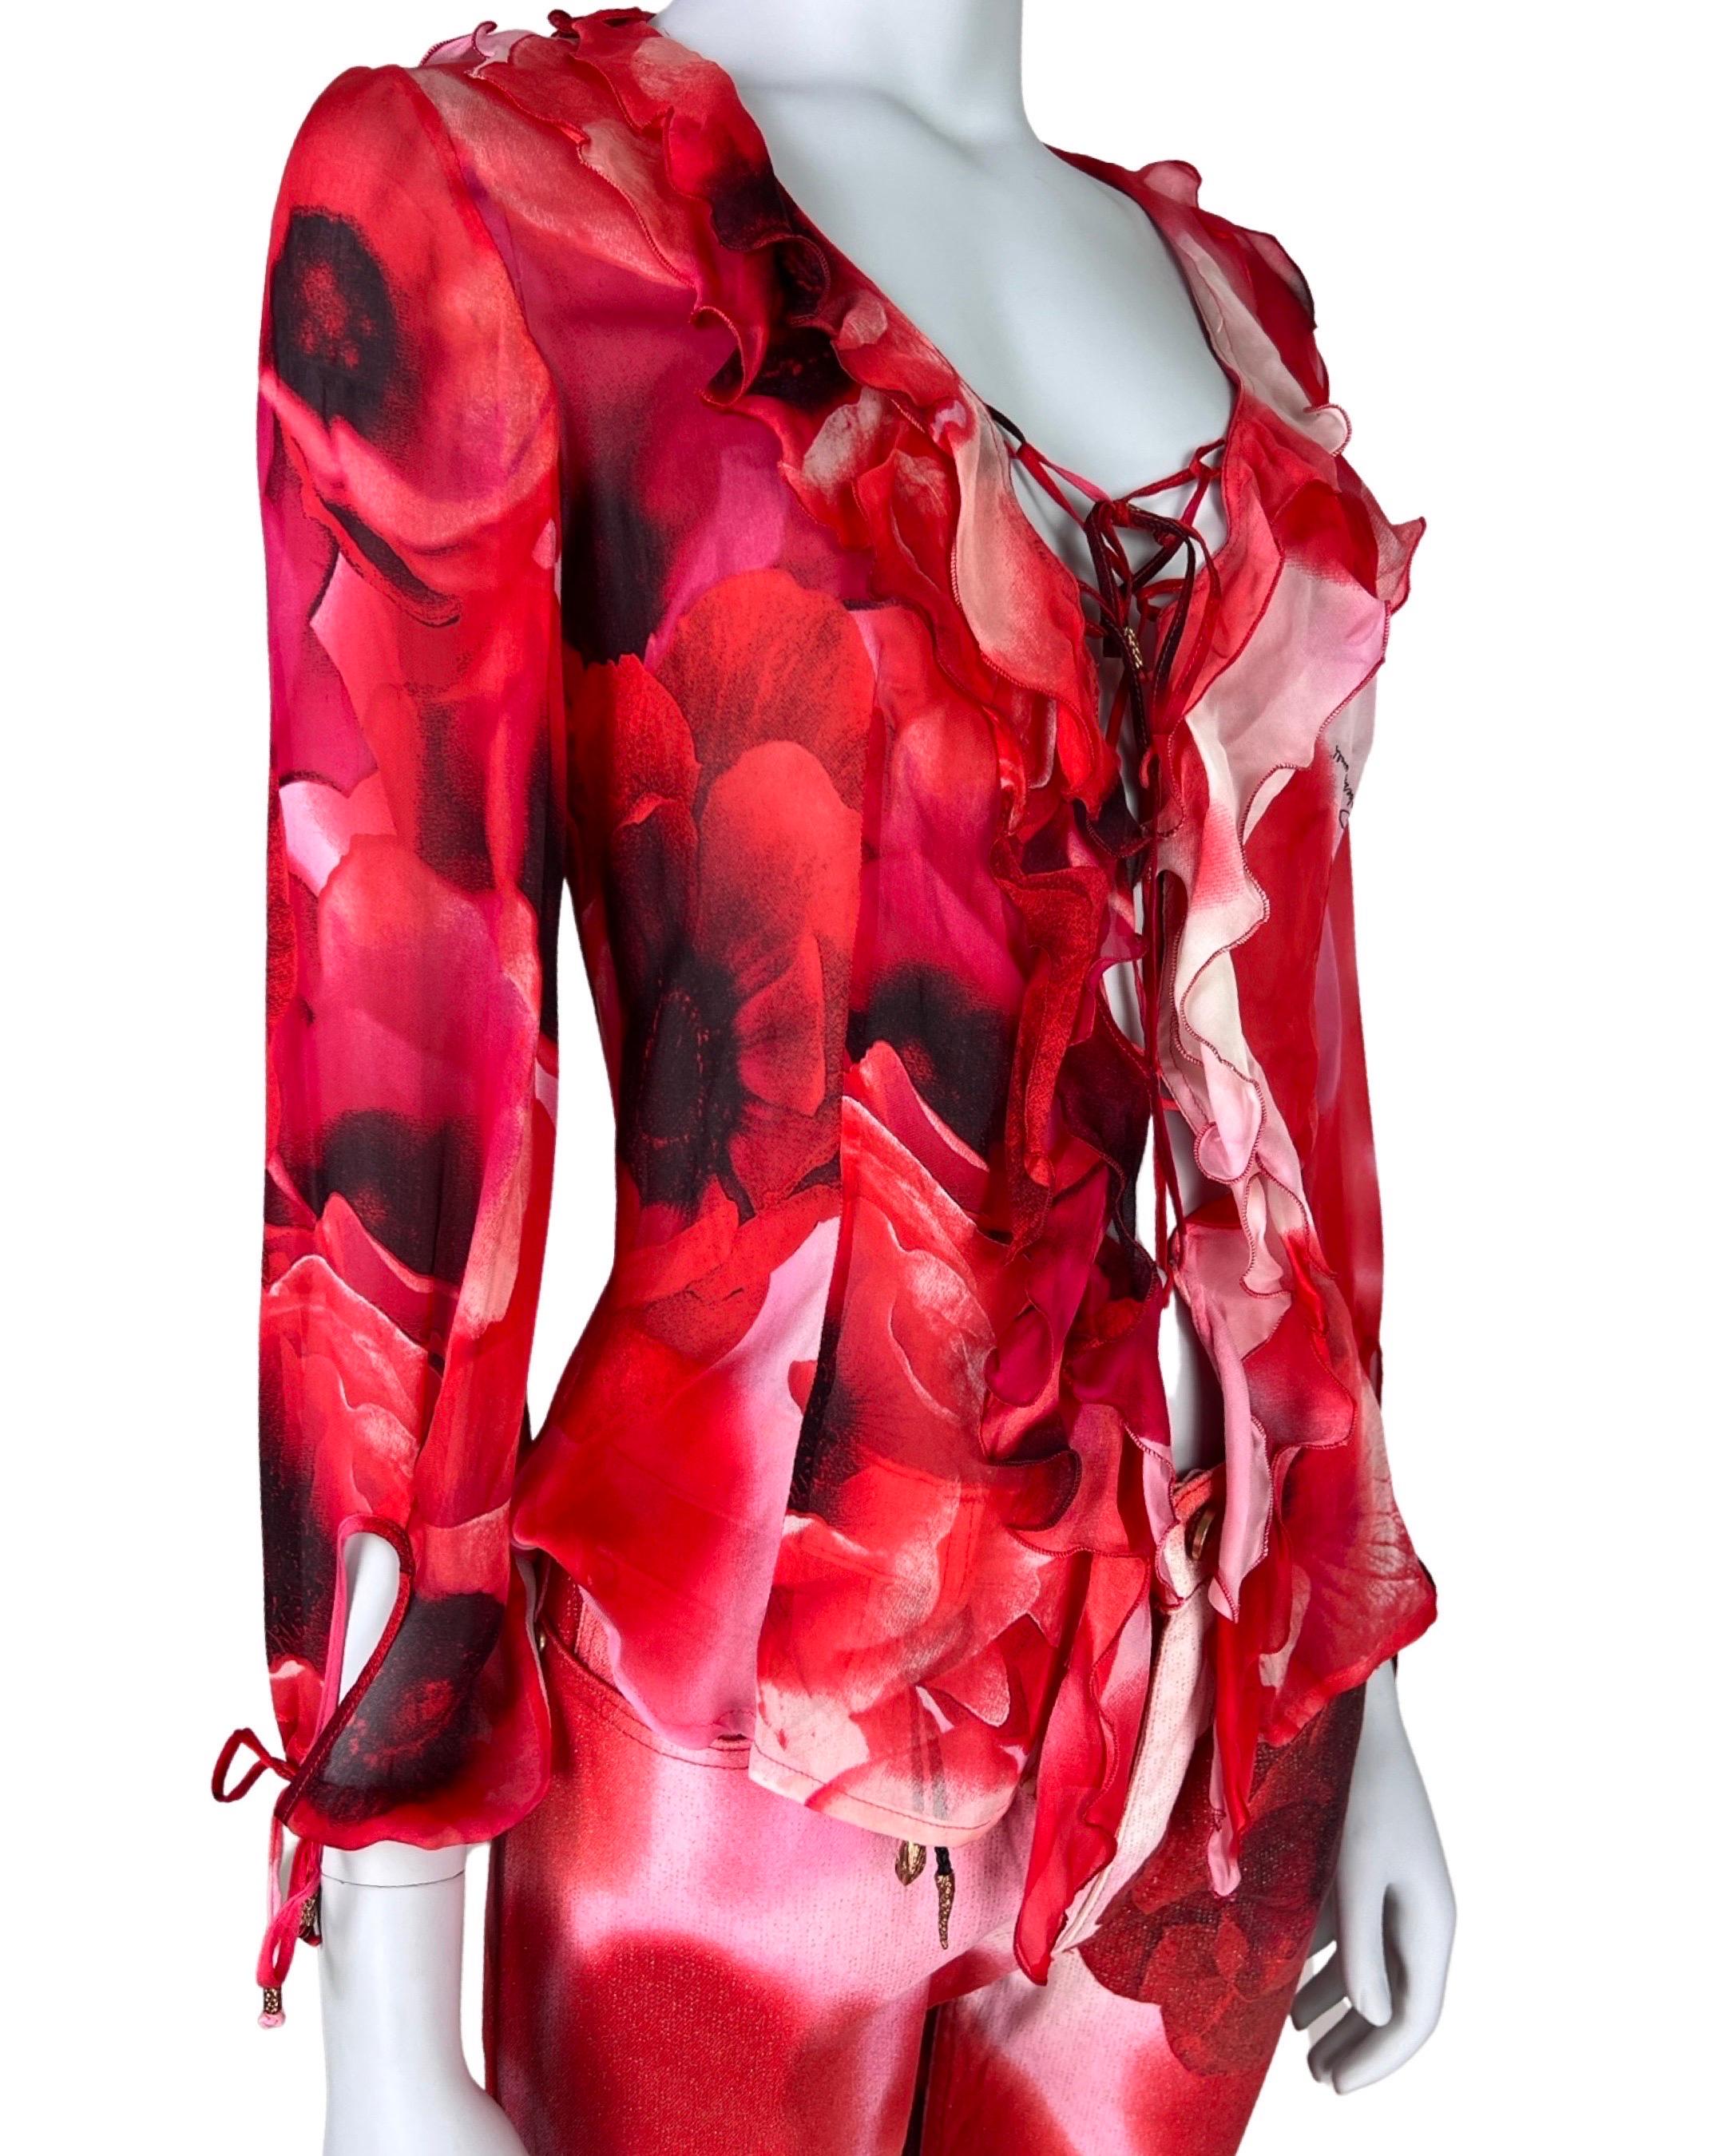 Roberto Cavalli Spring 2002 Poppy Print Blouse and Jeans Set For Sale 5